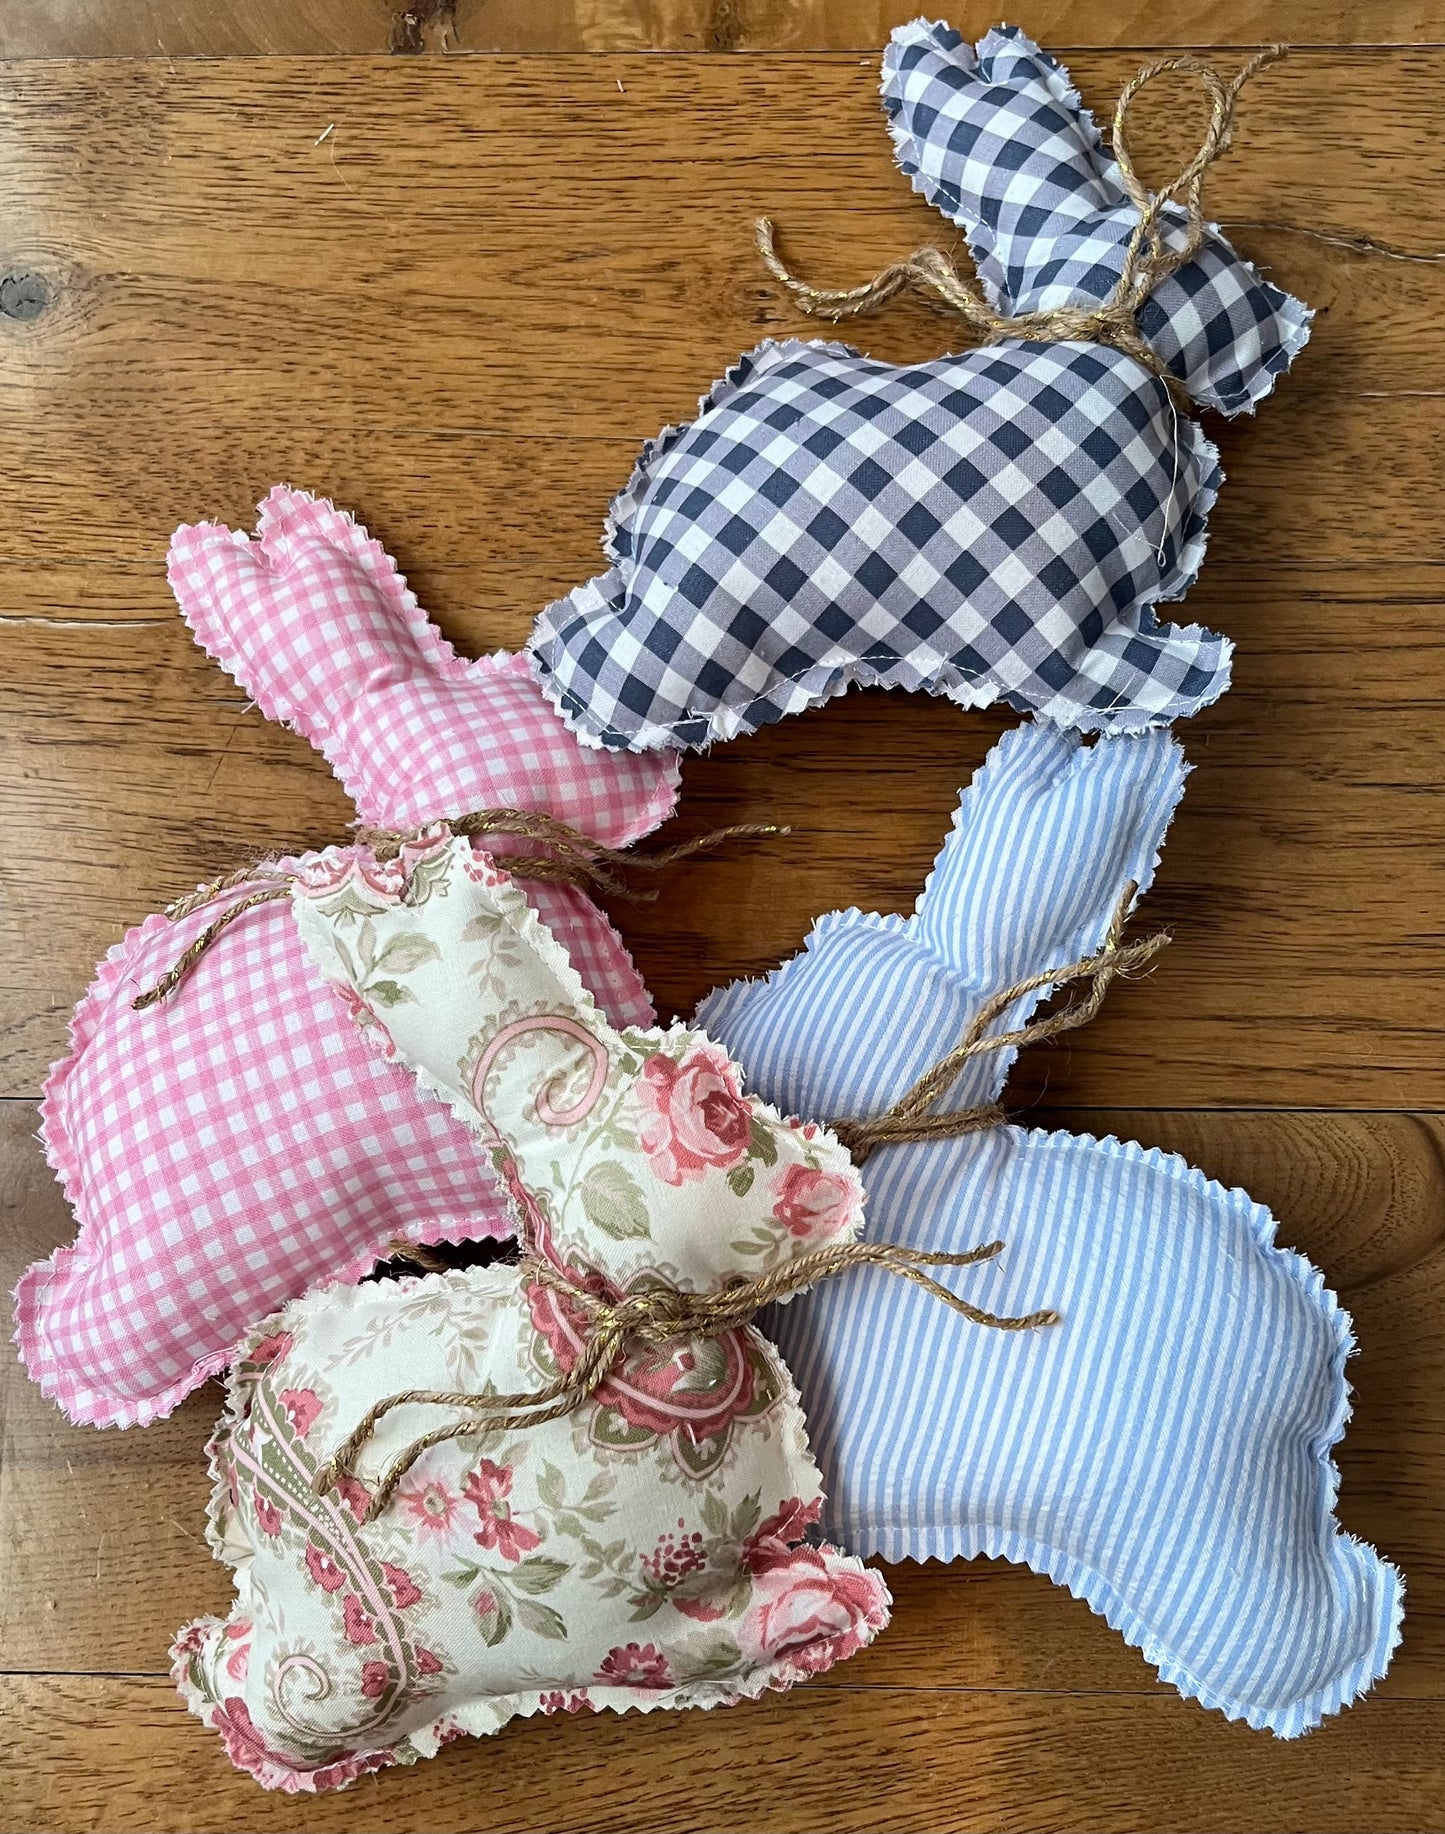 Stuffed Bunnies for Decorating